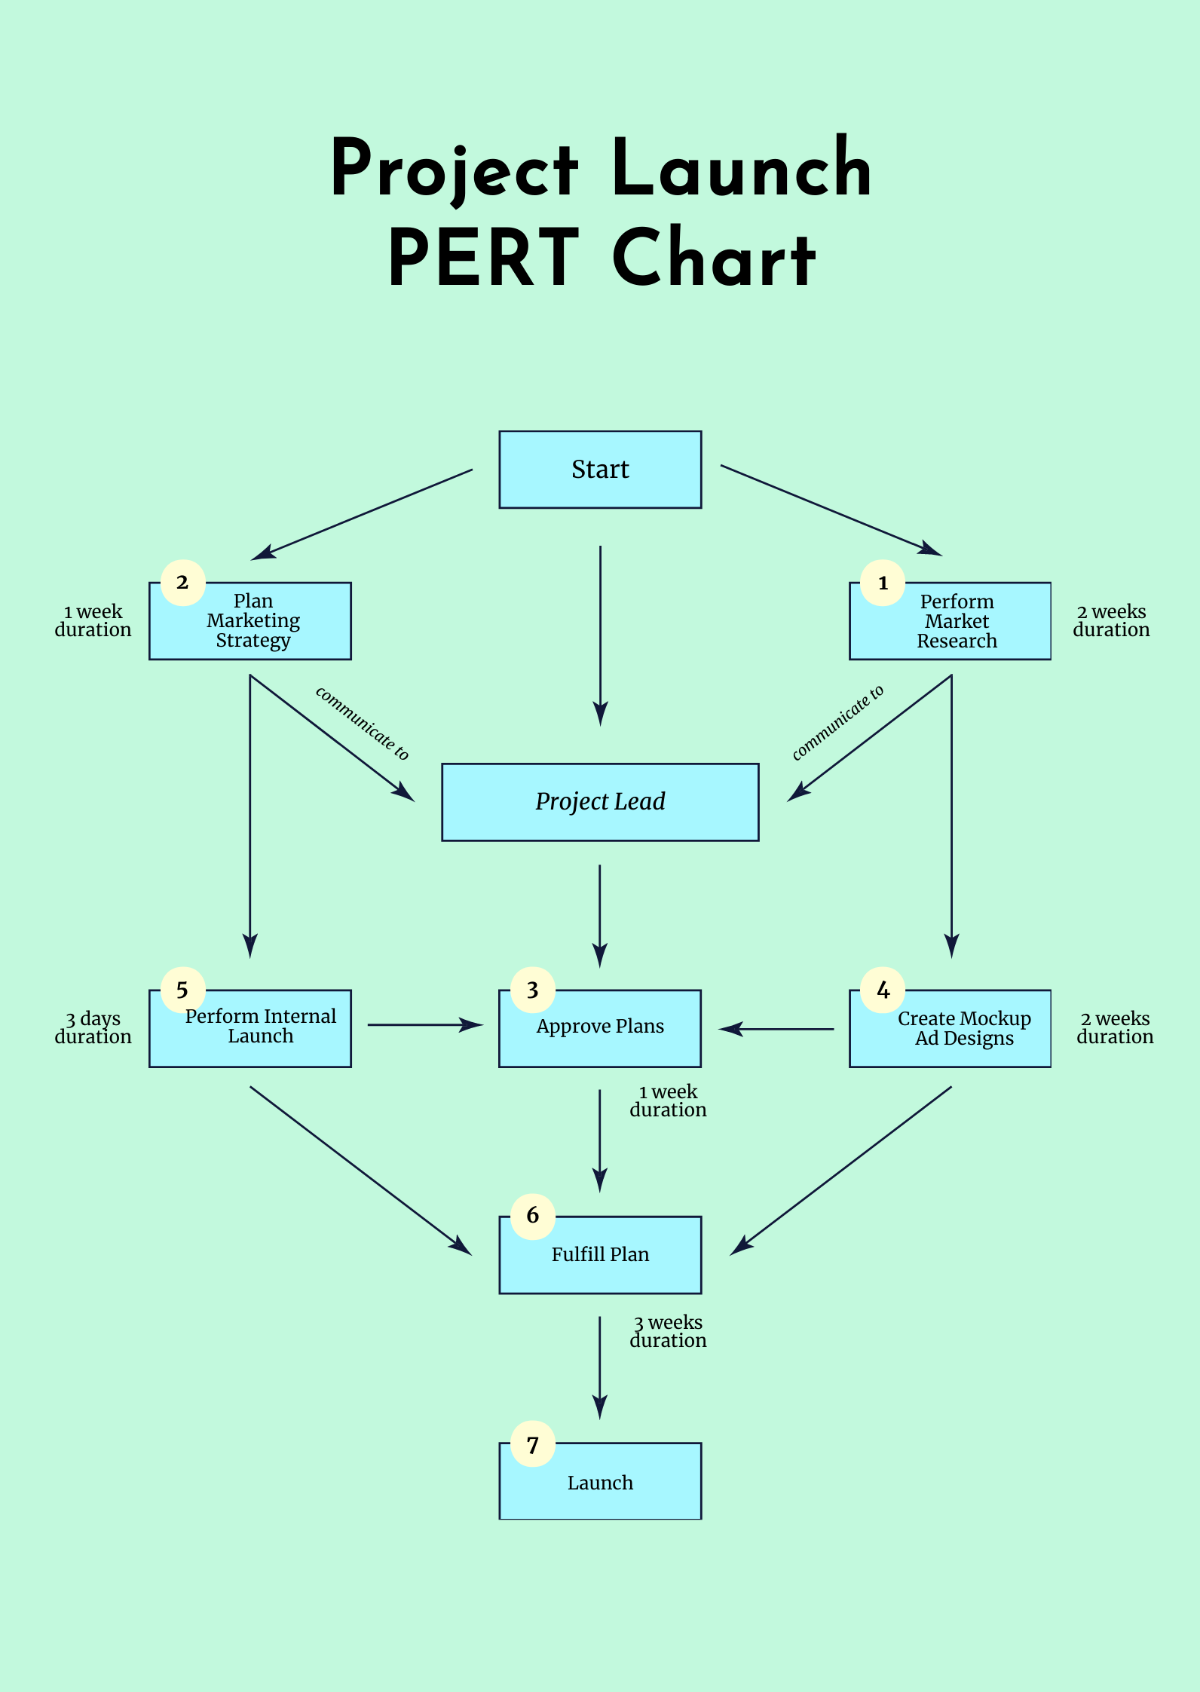 Product Launch PERT Chart Template